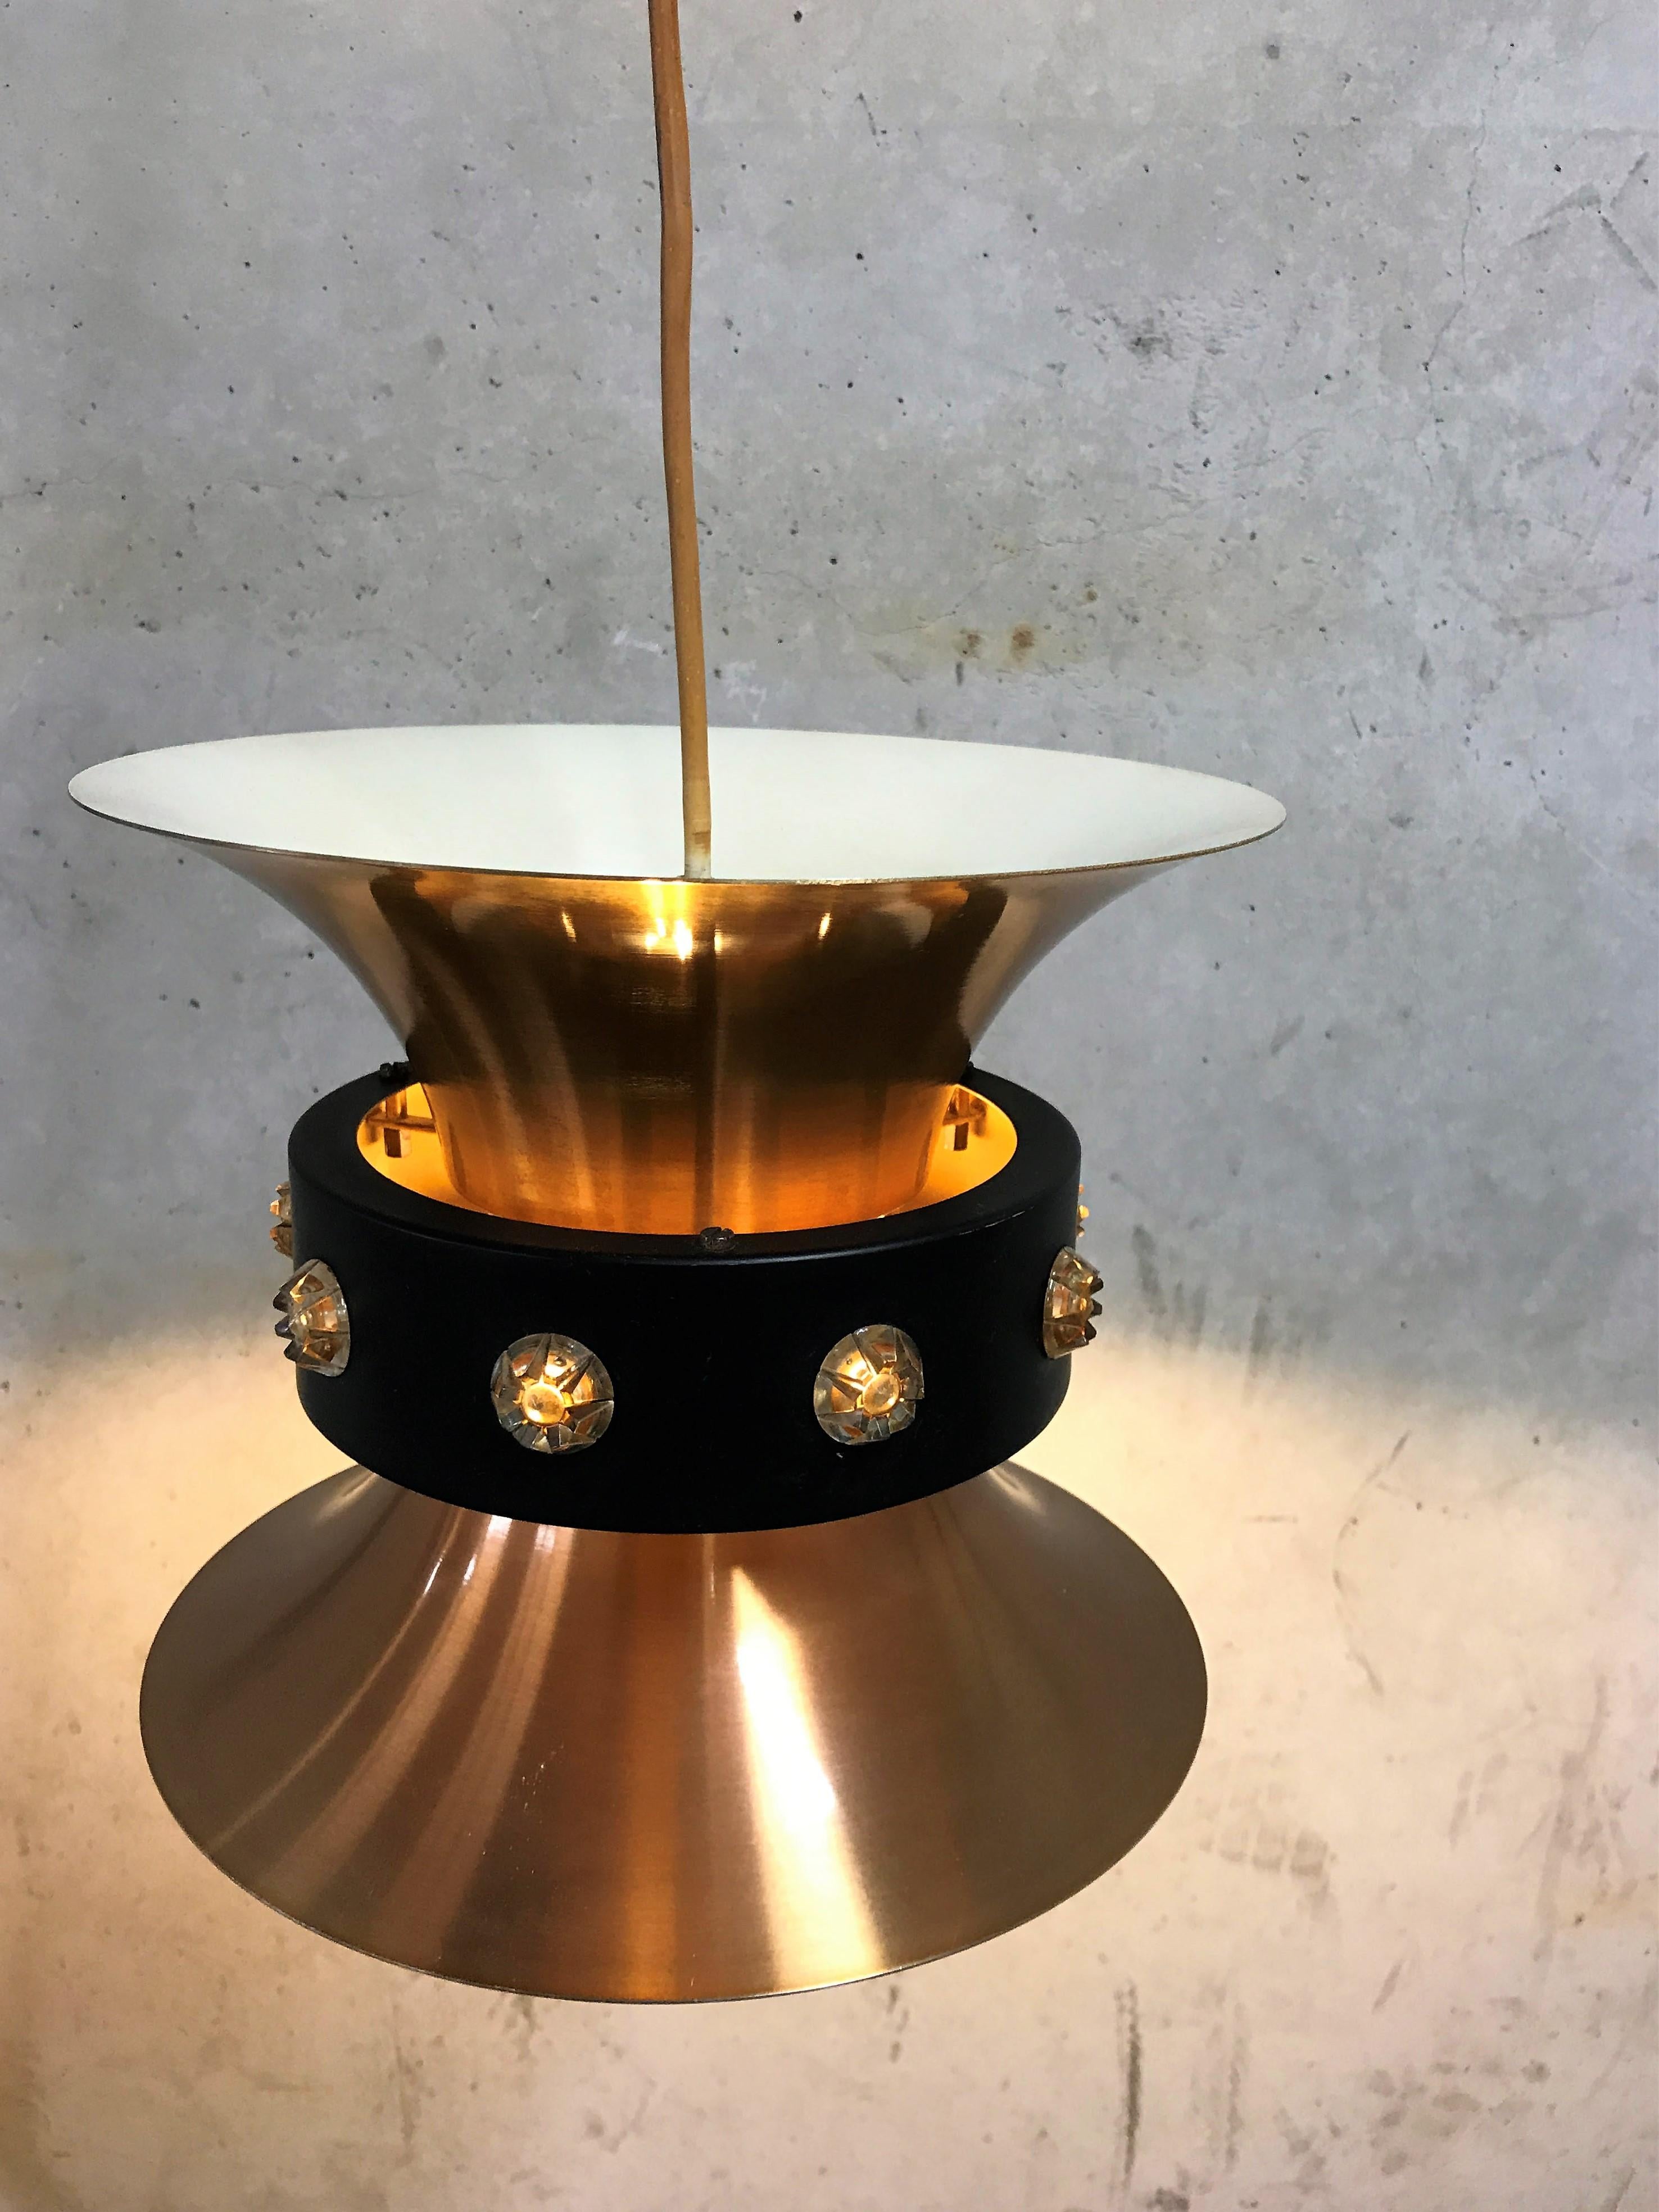 Brass pendant light by Carl Thore for Granhaga Metal Industry.

This beautiful Swedish design lamp was produced during the space age era in the late 1960s.

The diabolo shaped lamp produces a up-and downwards light/

Finished with a black ring